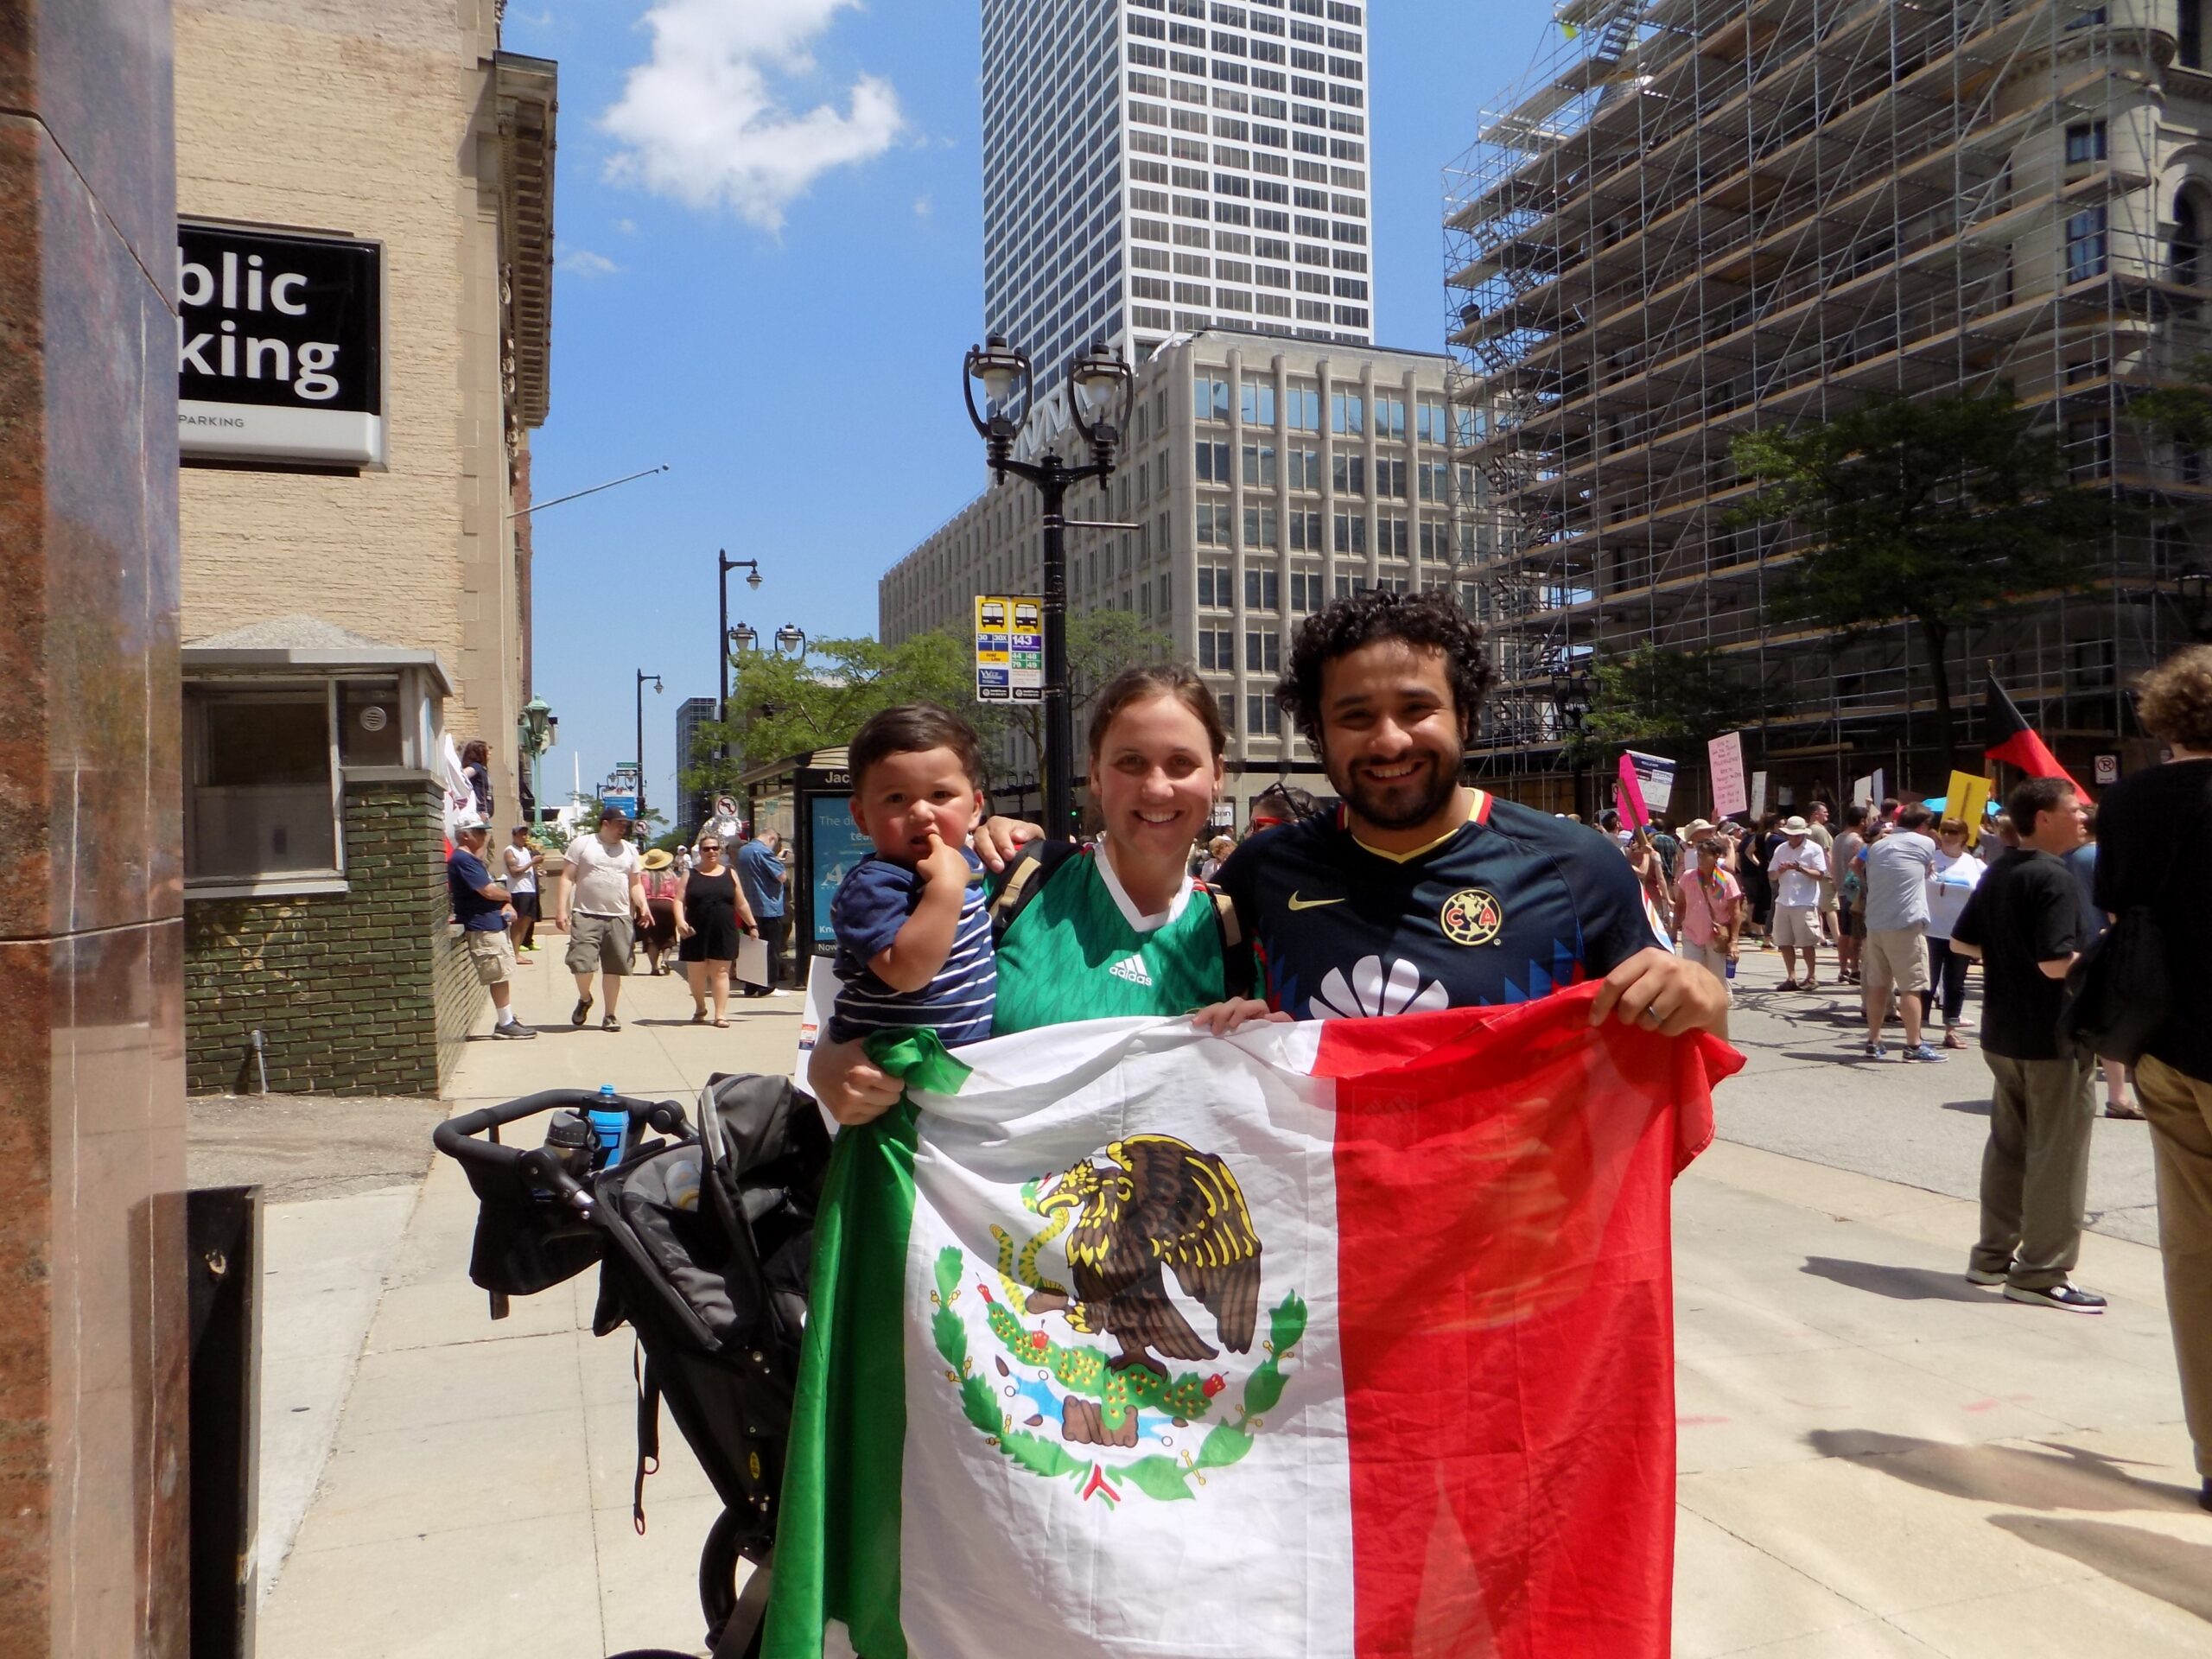 Keep Families Together rally in Milwaukee, June 2018